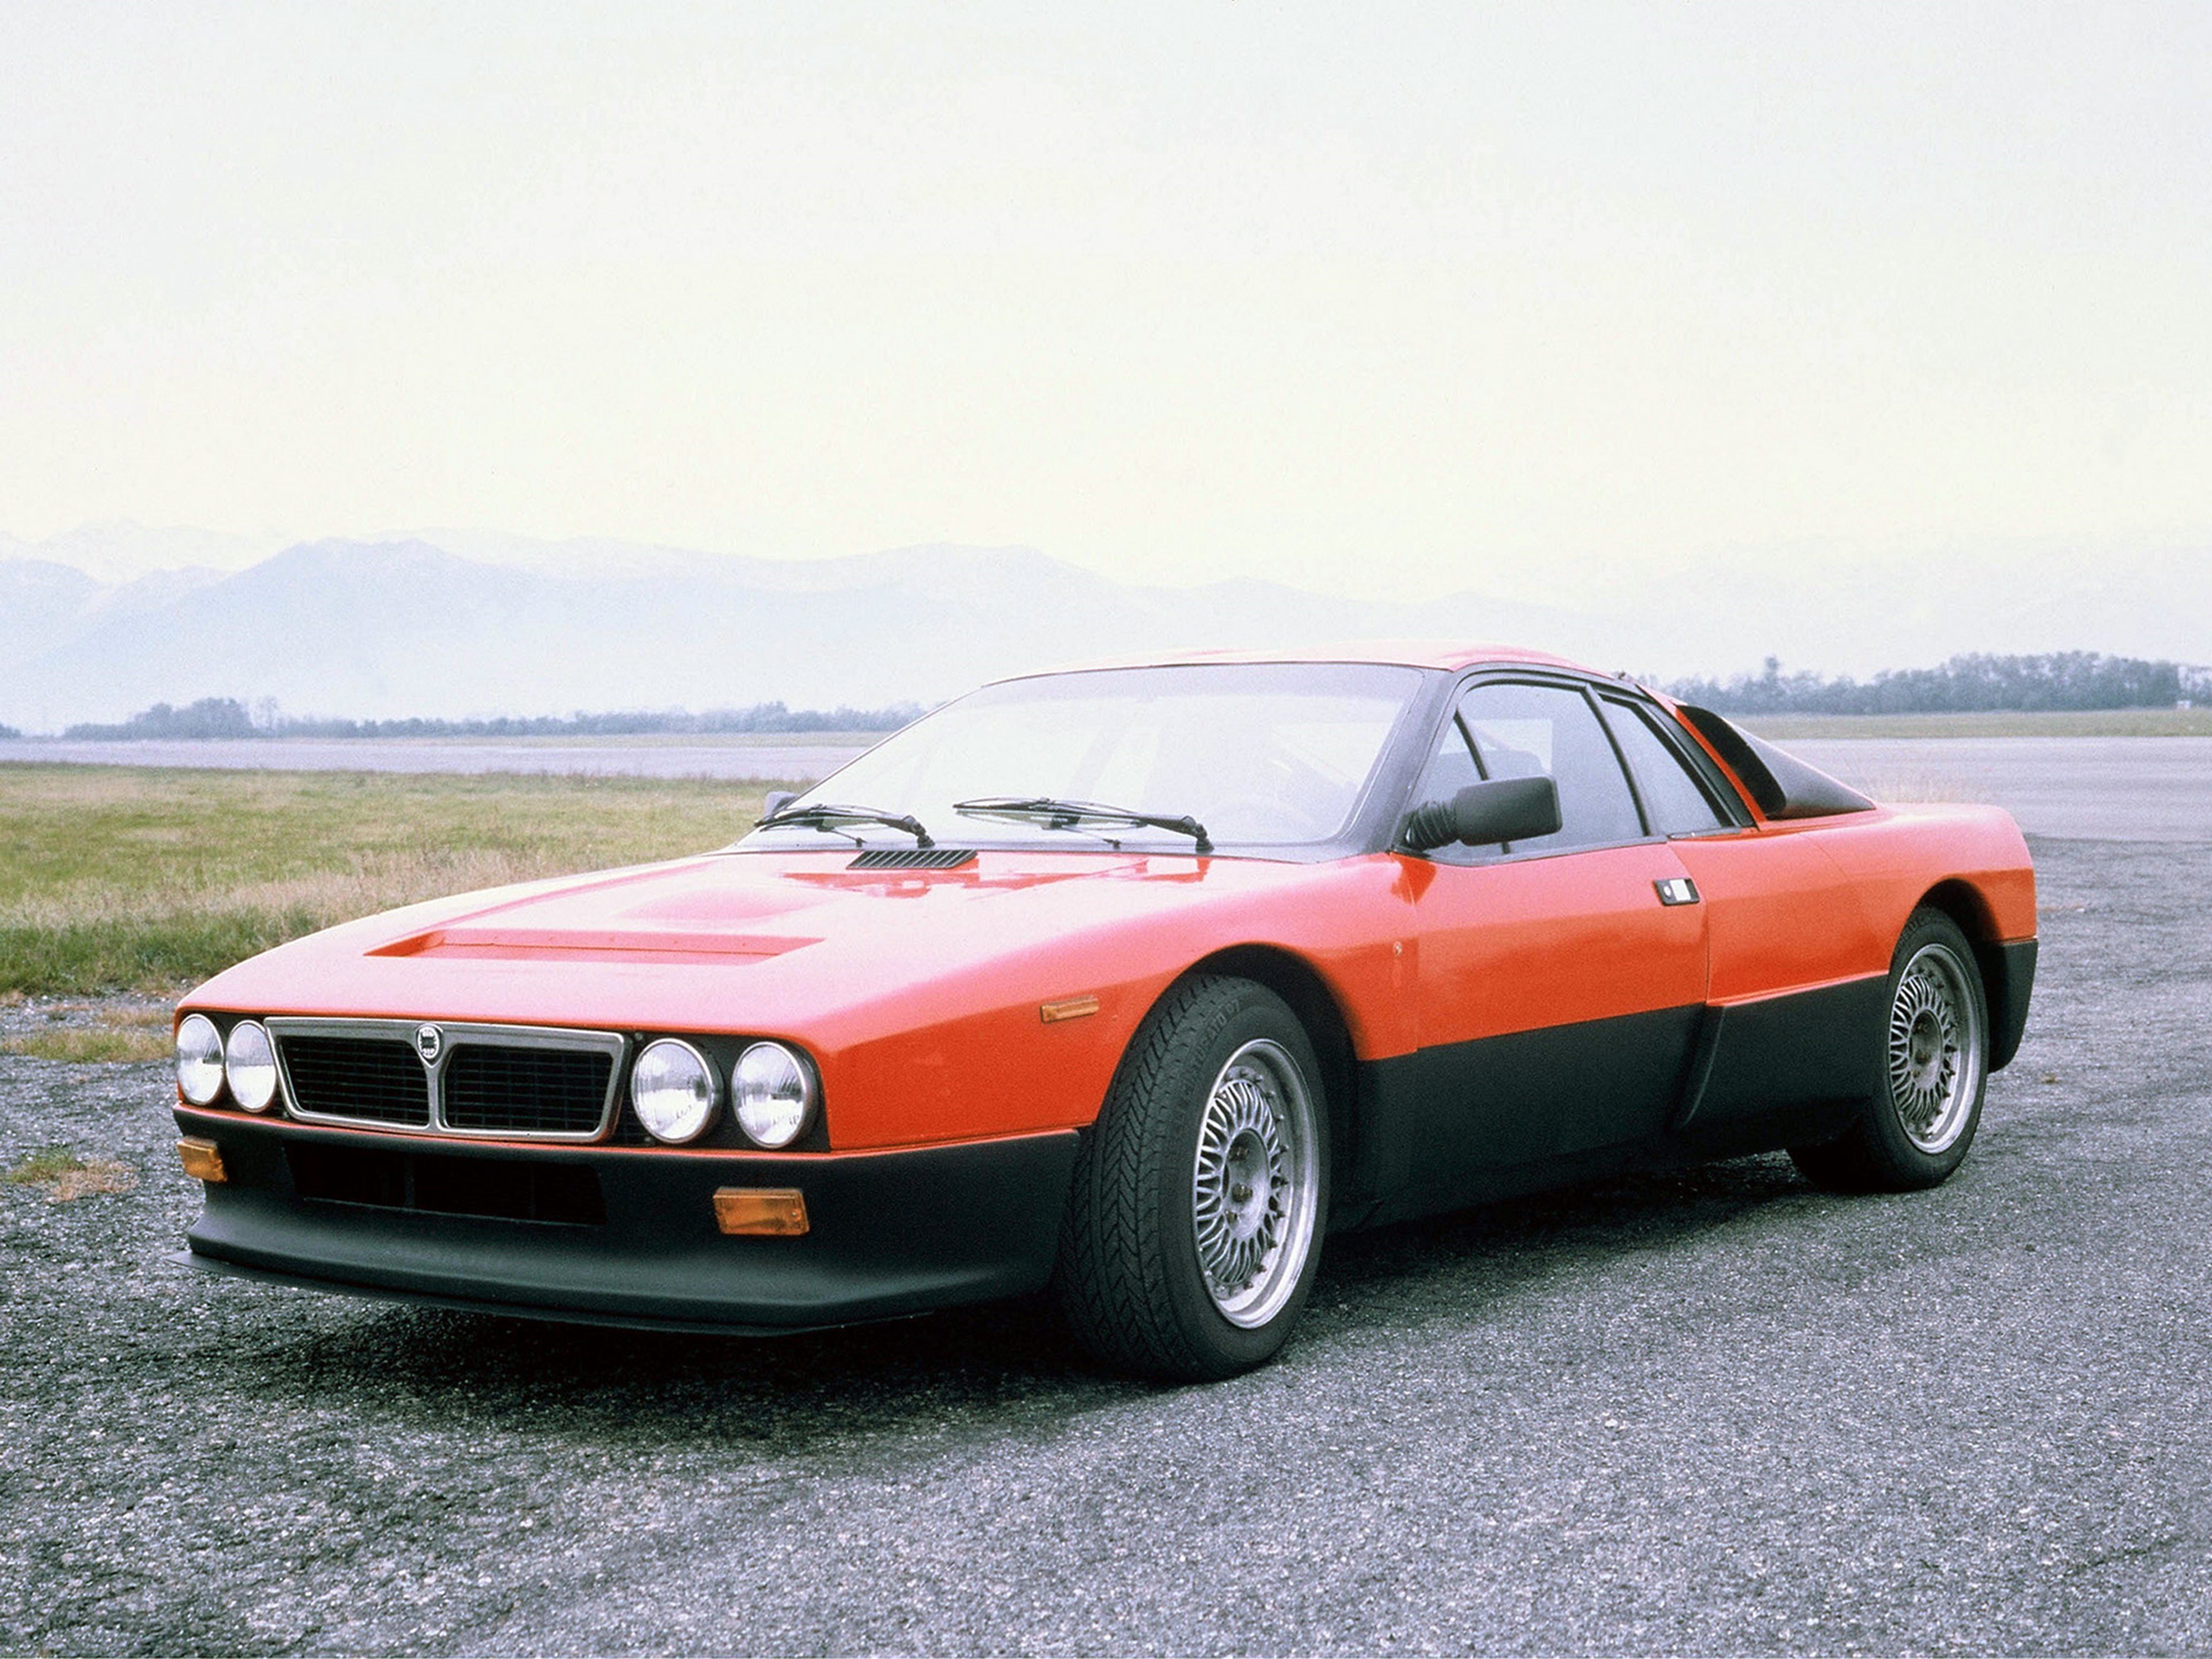 1982, Lancia, Rally 037, Stradale, Car, Vehicle, Classic, Sport, Supercar, Italy, 4000x3000 Wallpaper